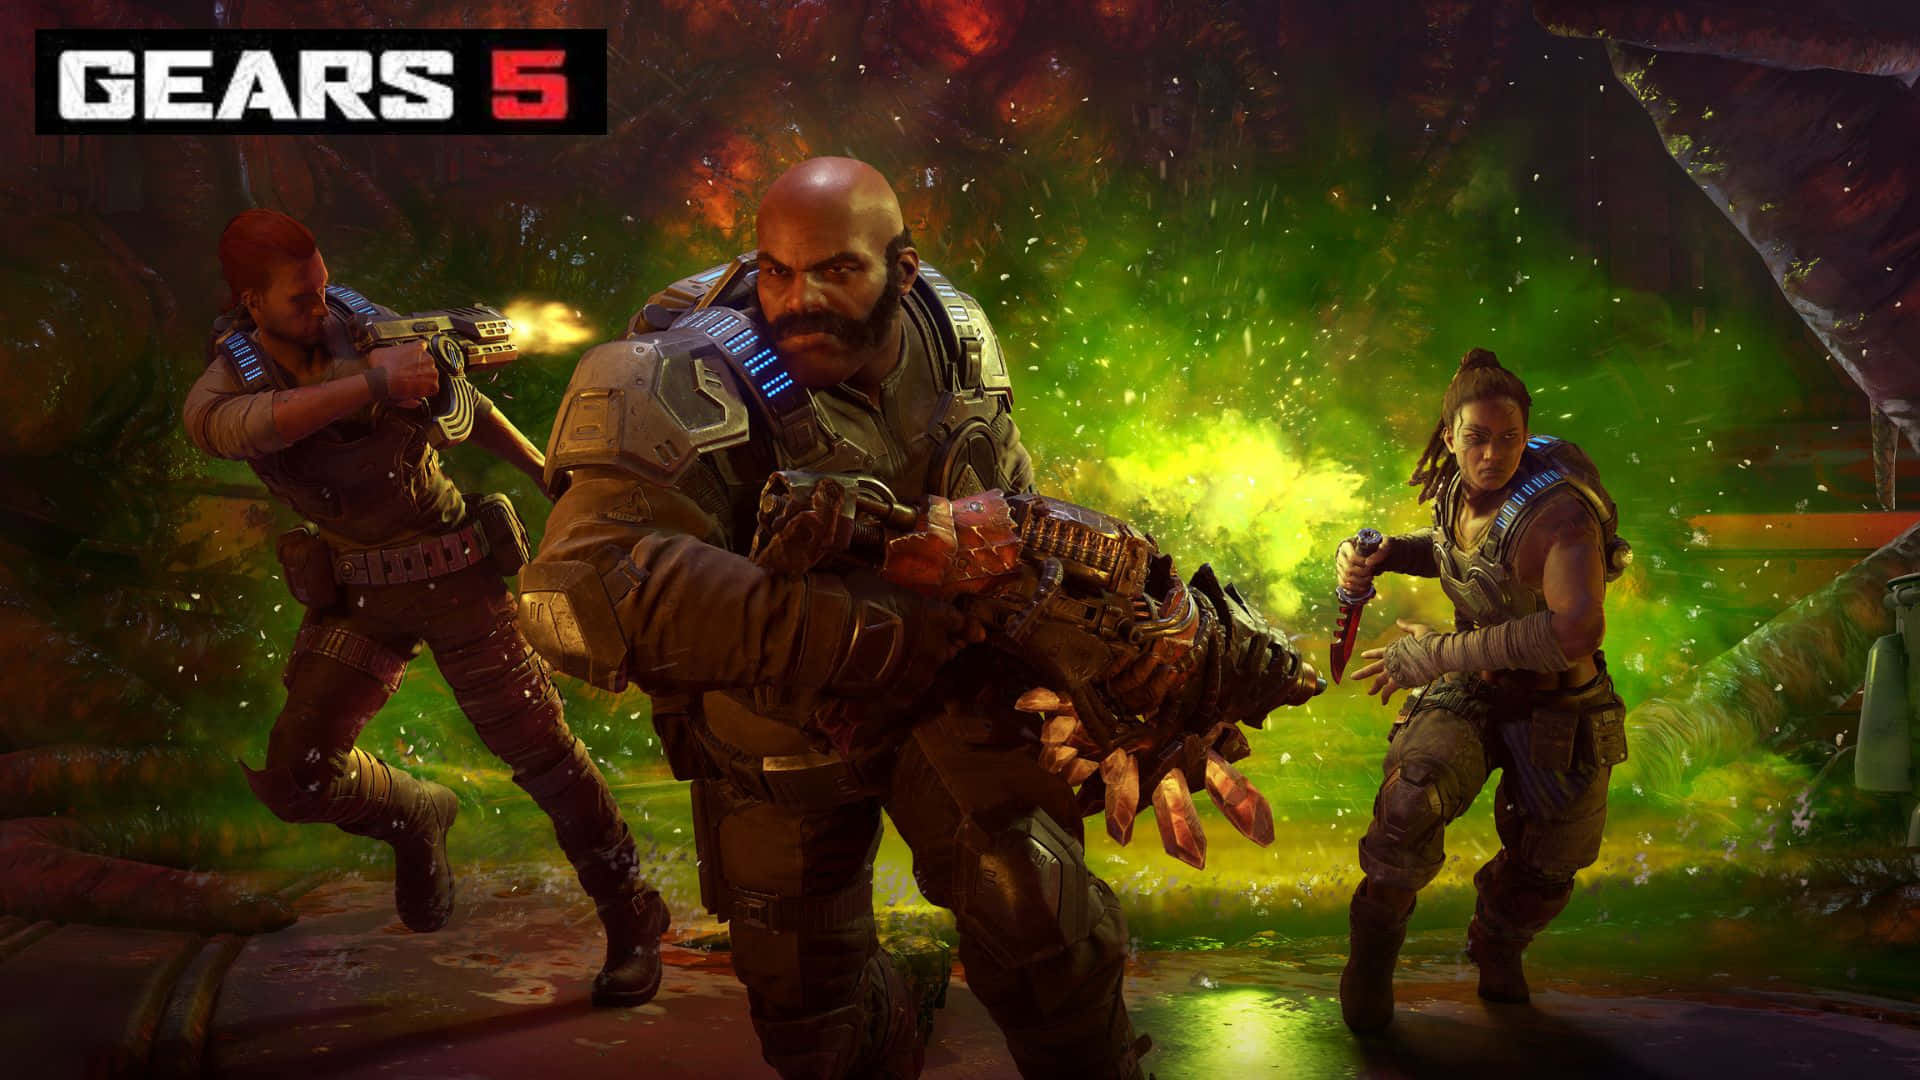 Ready to join Marcus Fenix in the fight to save humanity in Gears Of War 5?